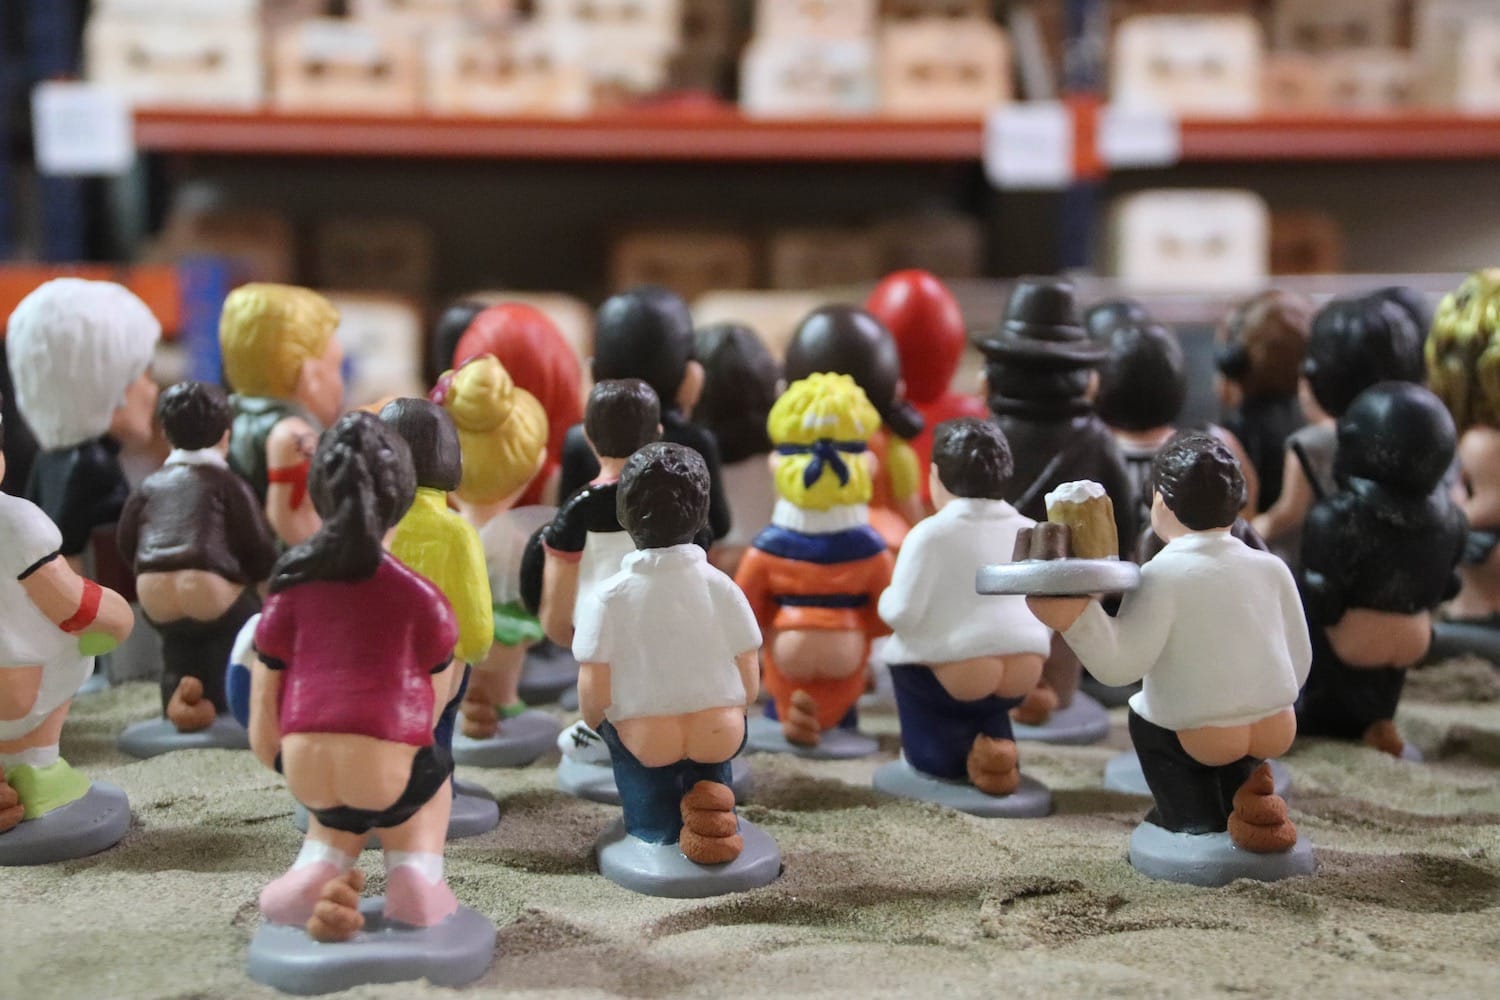 Caganers from caganer.com